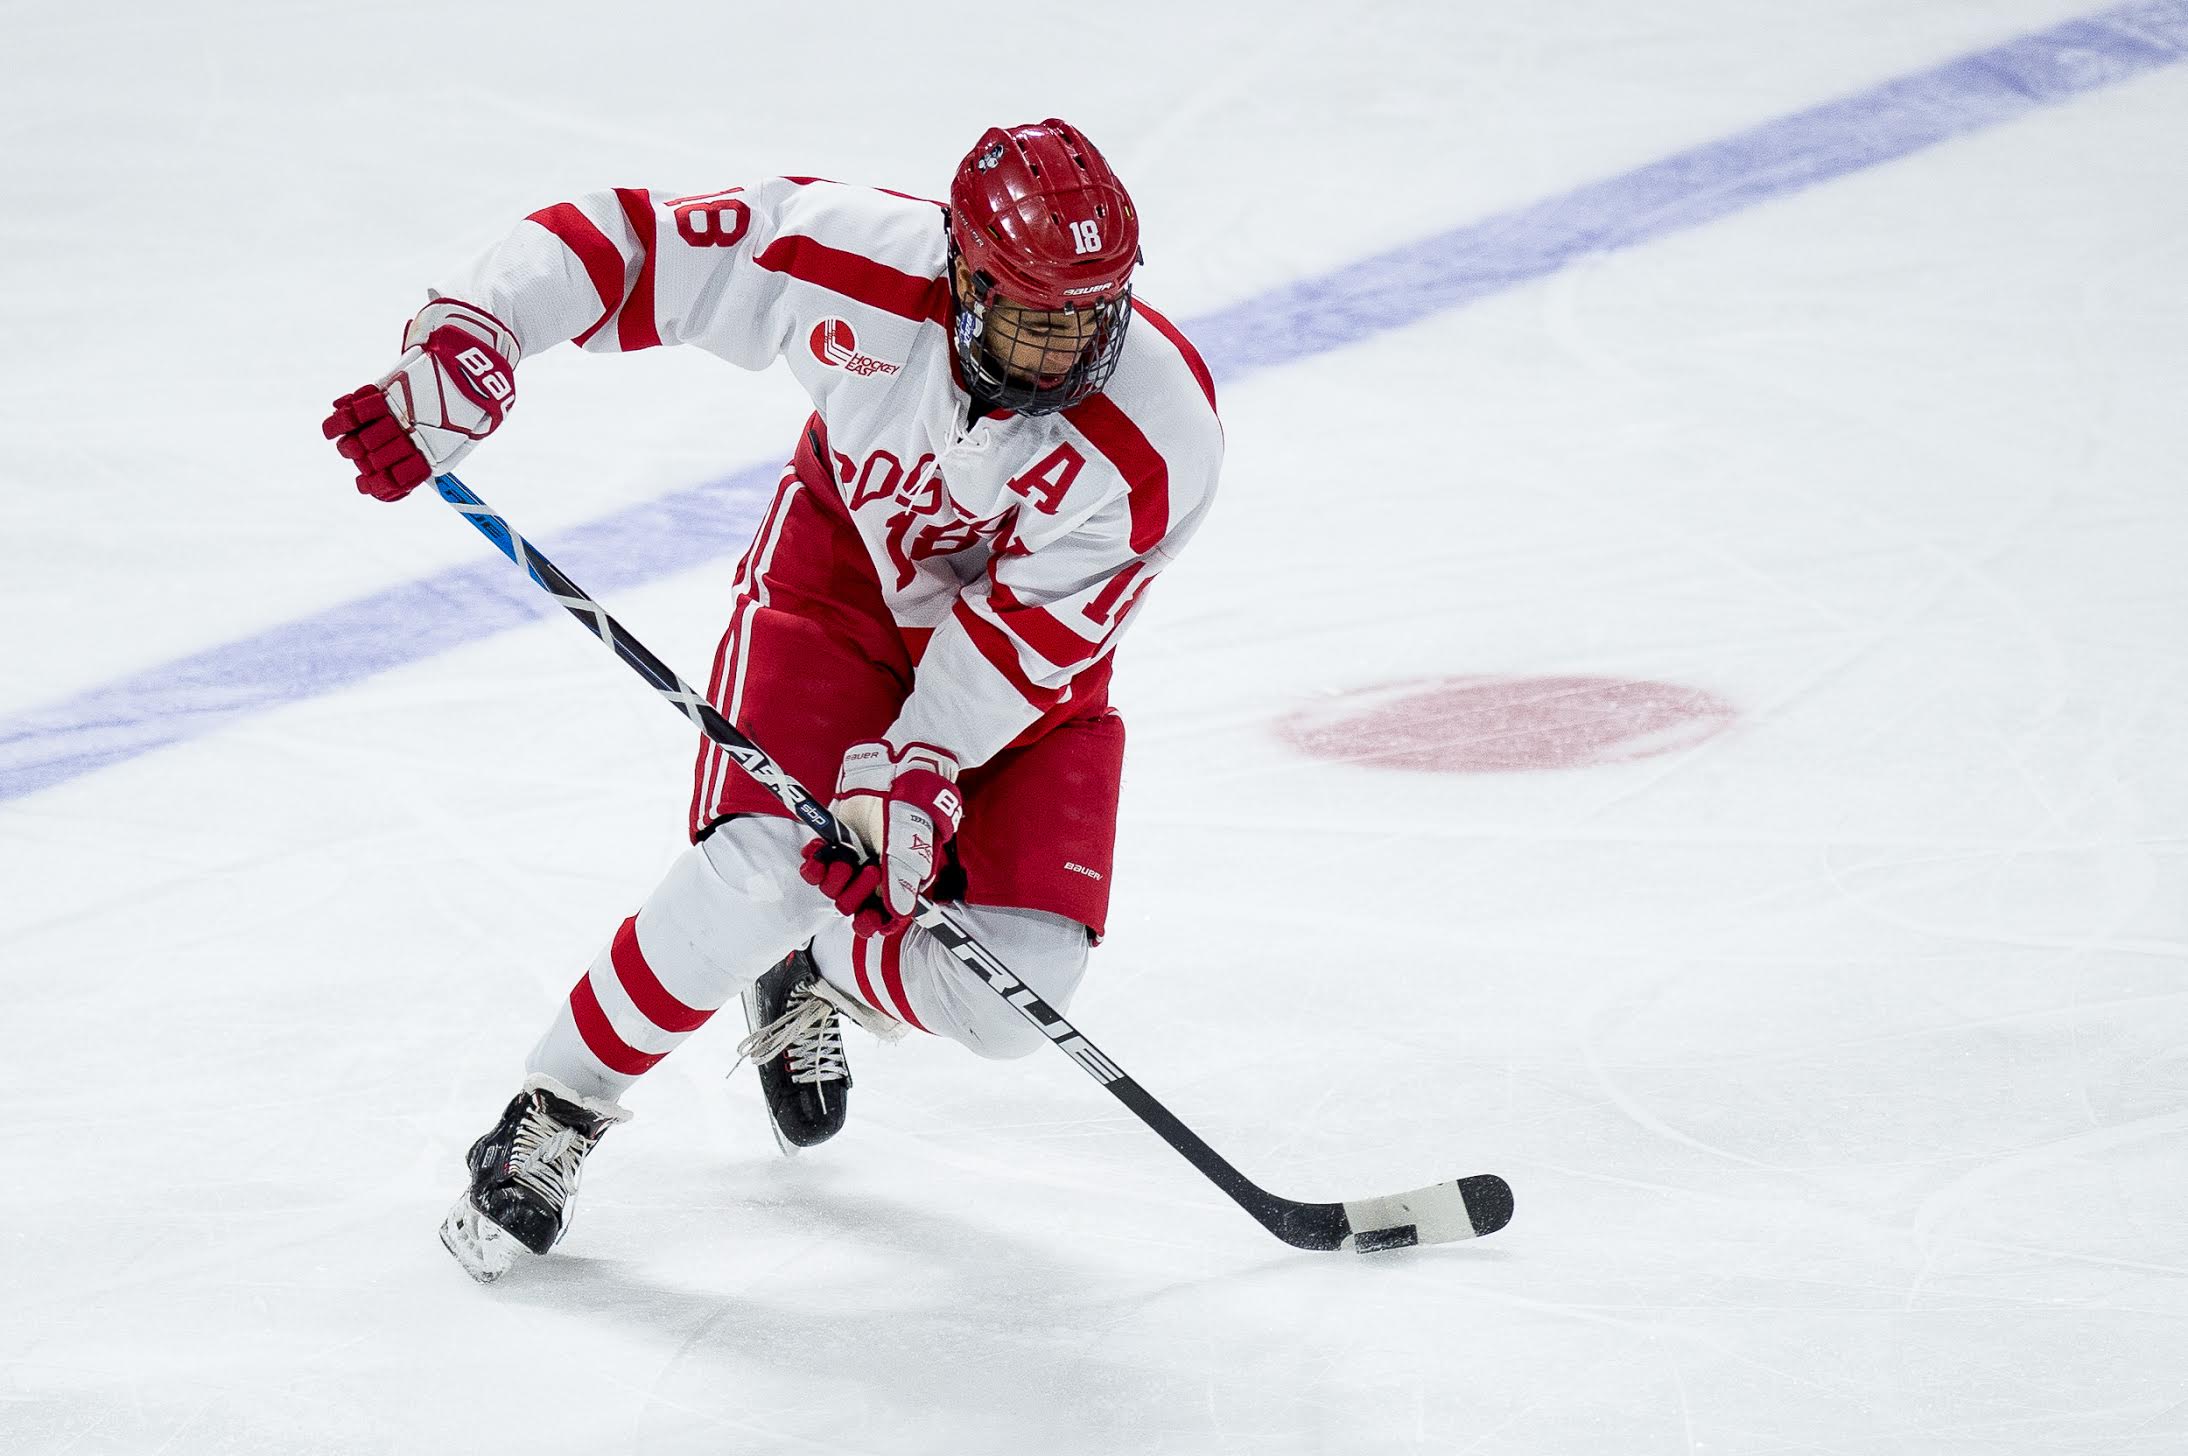 Jordan Greenway recorded three goals and one assist on Saturday. PHOTO BY MADDIE MALHOTRA/ DAILY FREE PRESS STAFF